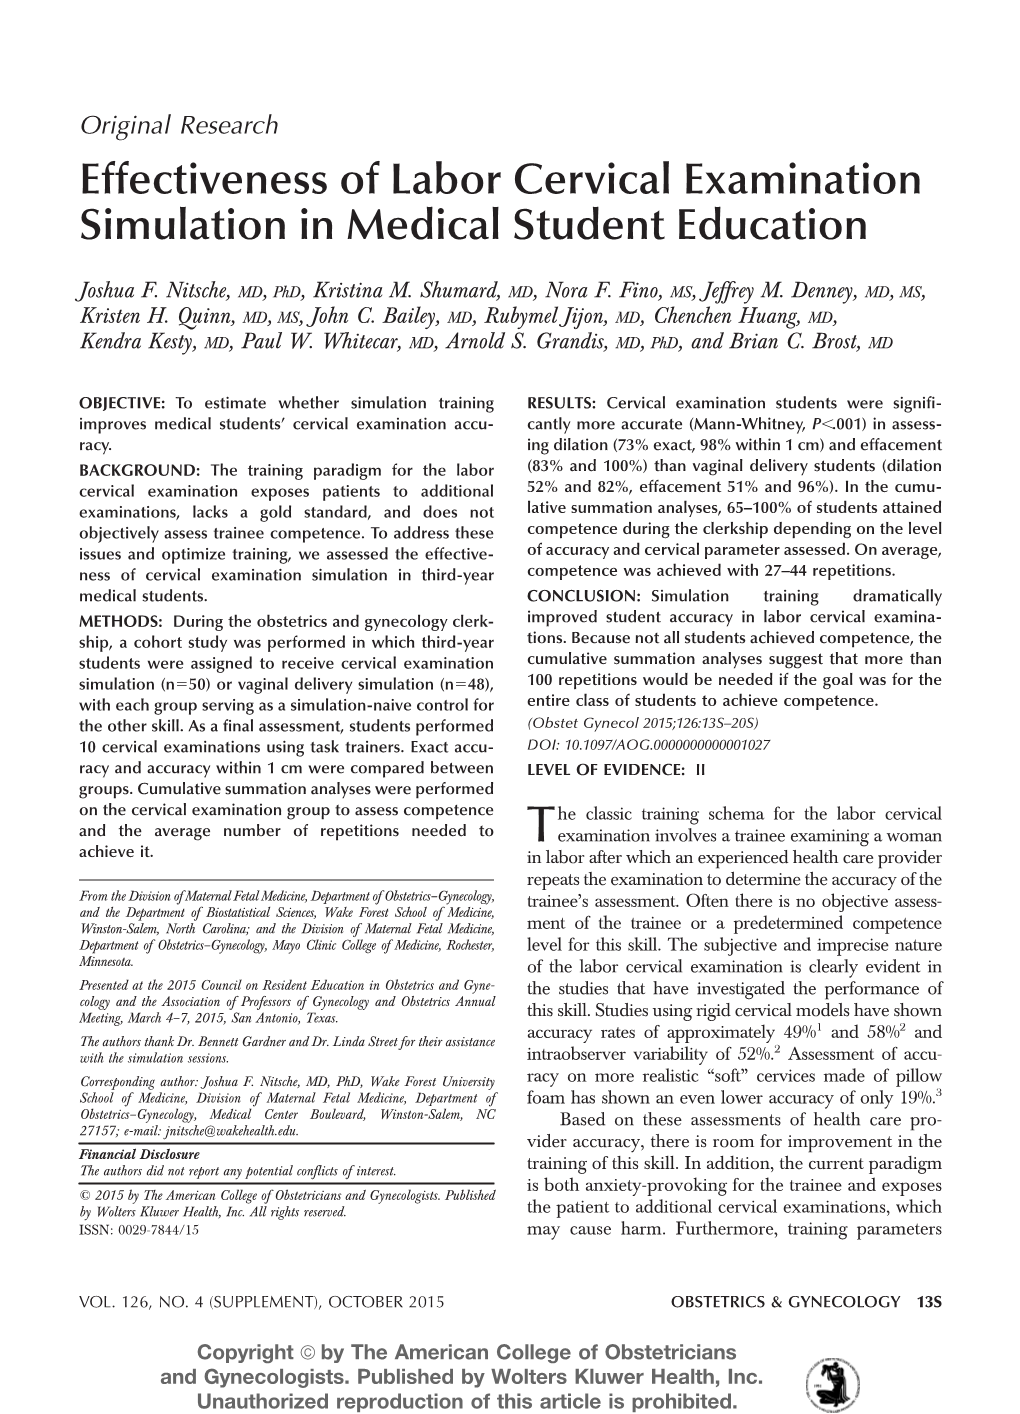 Effectiveness of Labor Cervical Examination Simulation in Medical Student Education